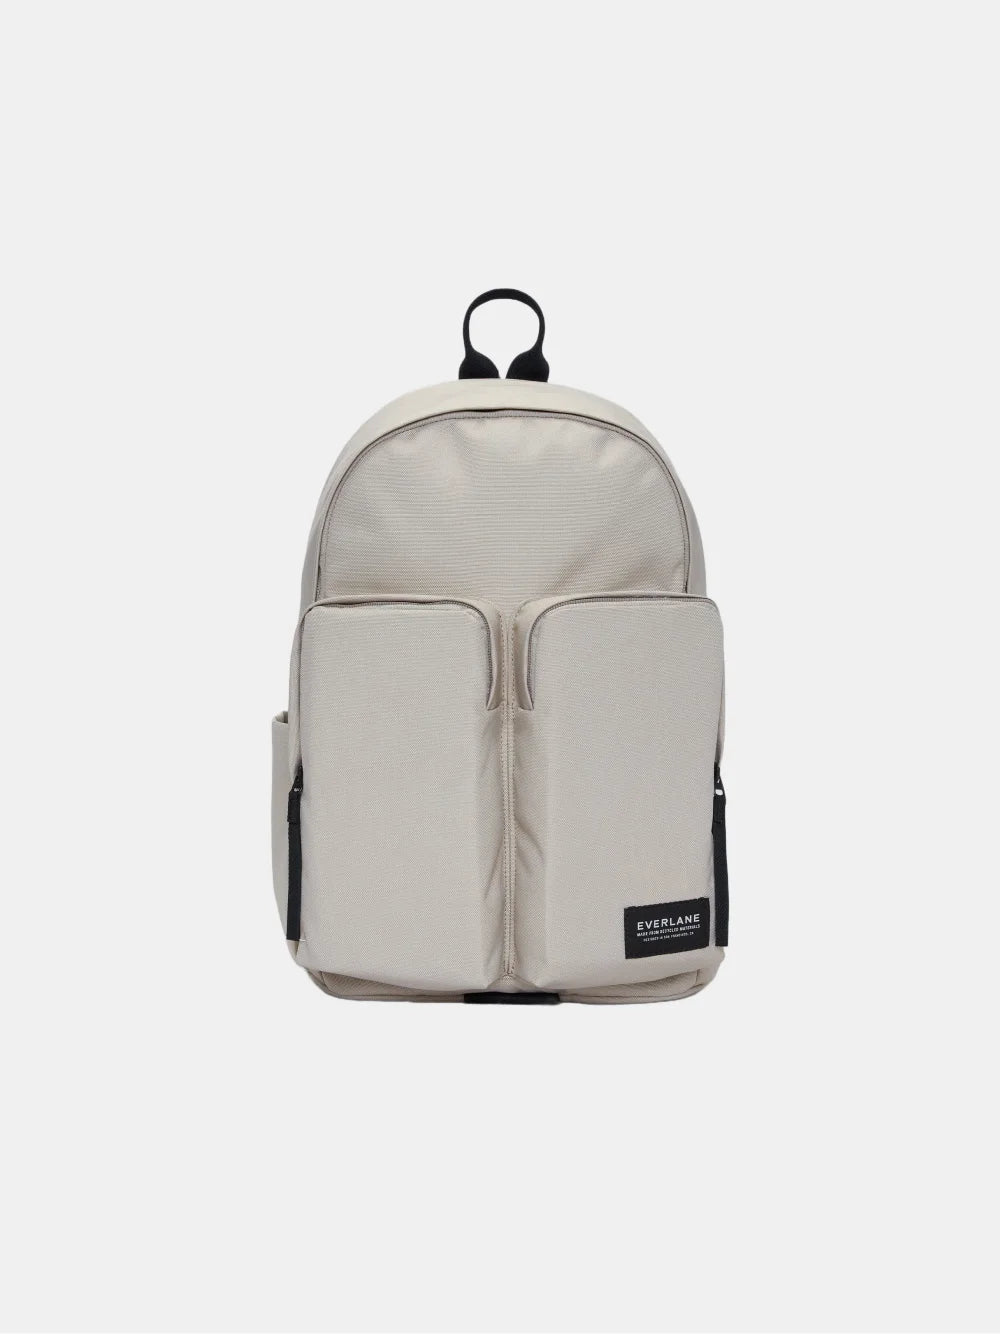 The Transit Backpack